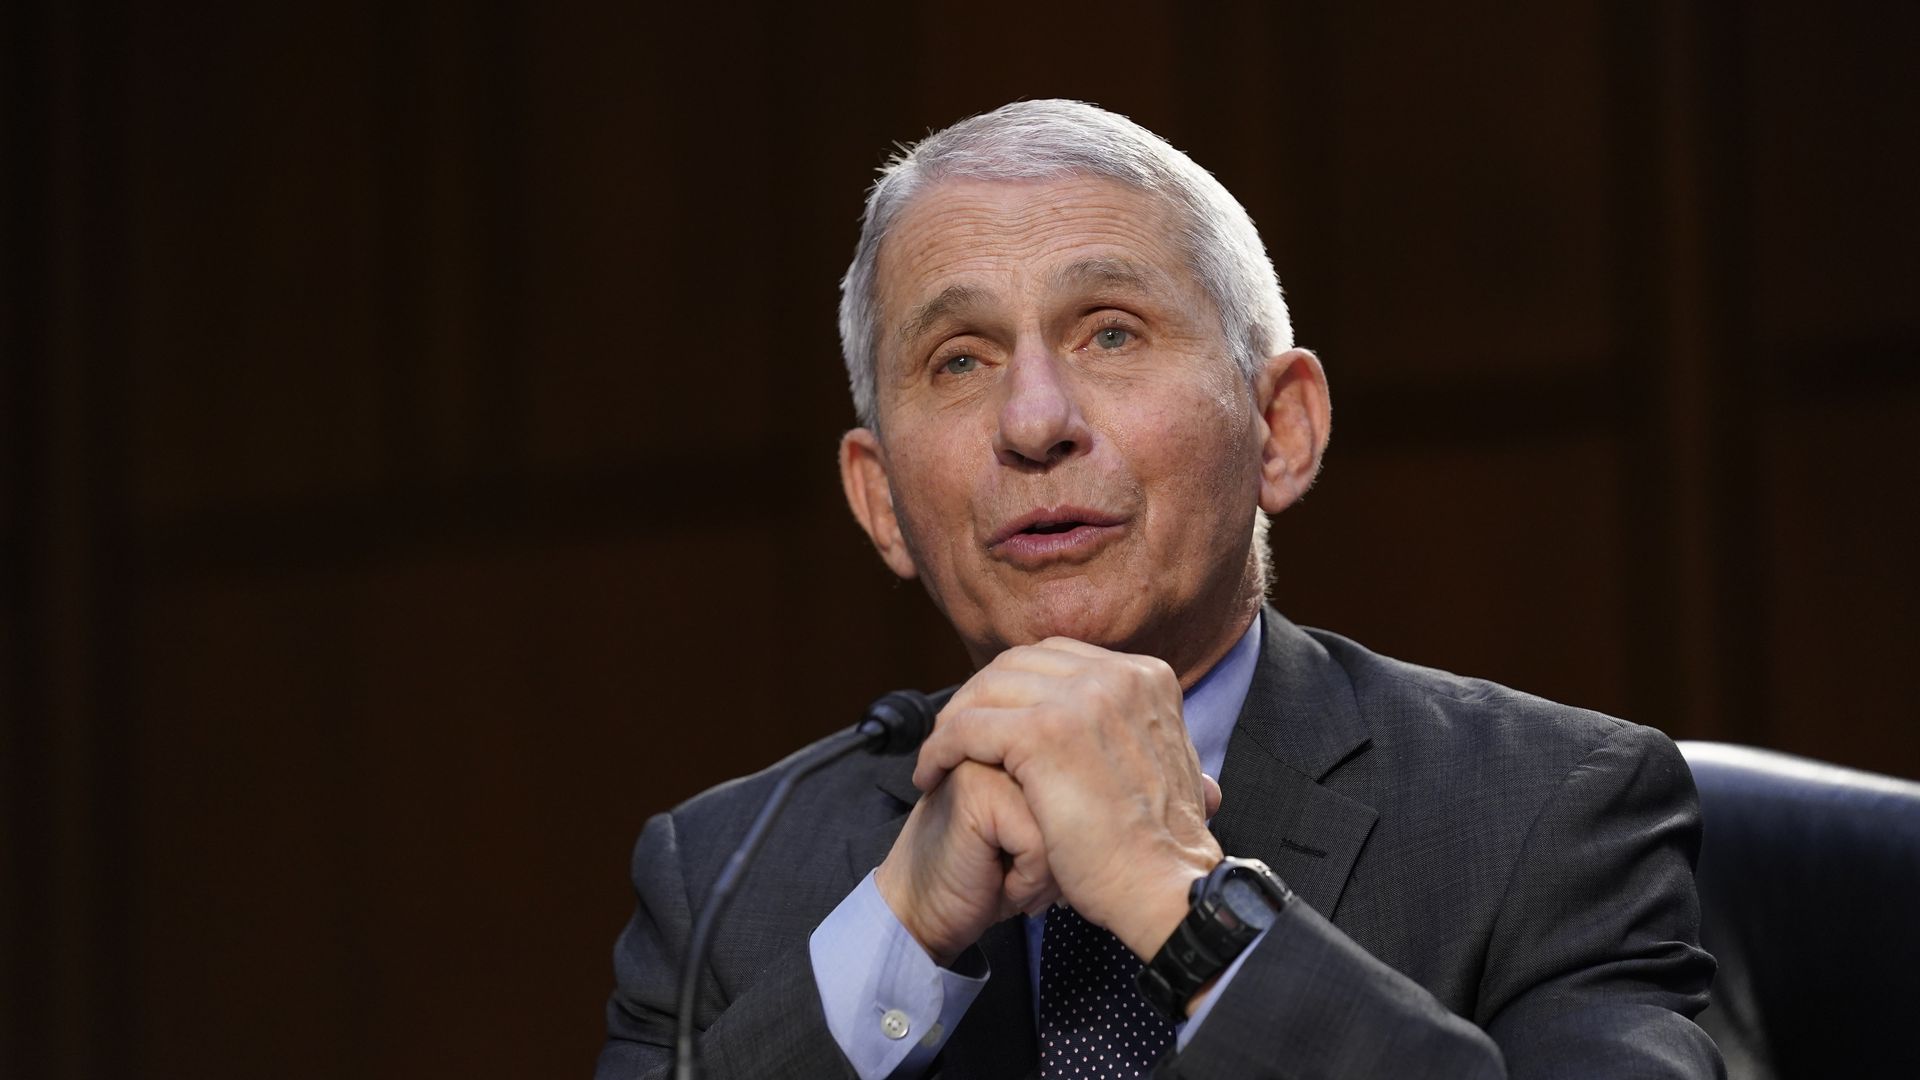 Anthony Fauci, NIAID director , speaks during a Senate hearing in Washington, D.C., U.S., on Thursday, March 18